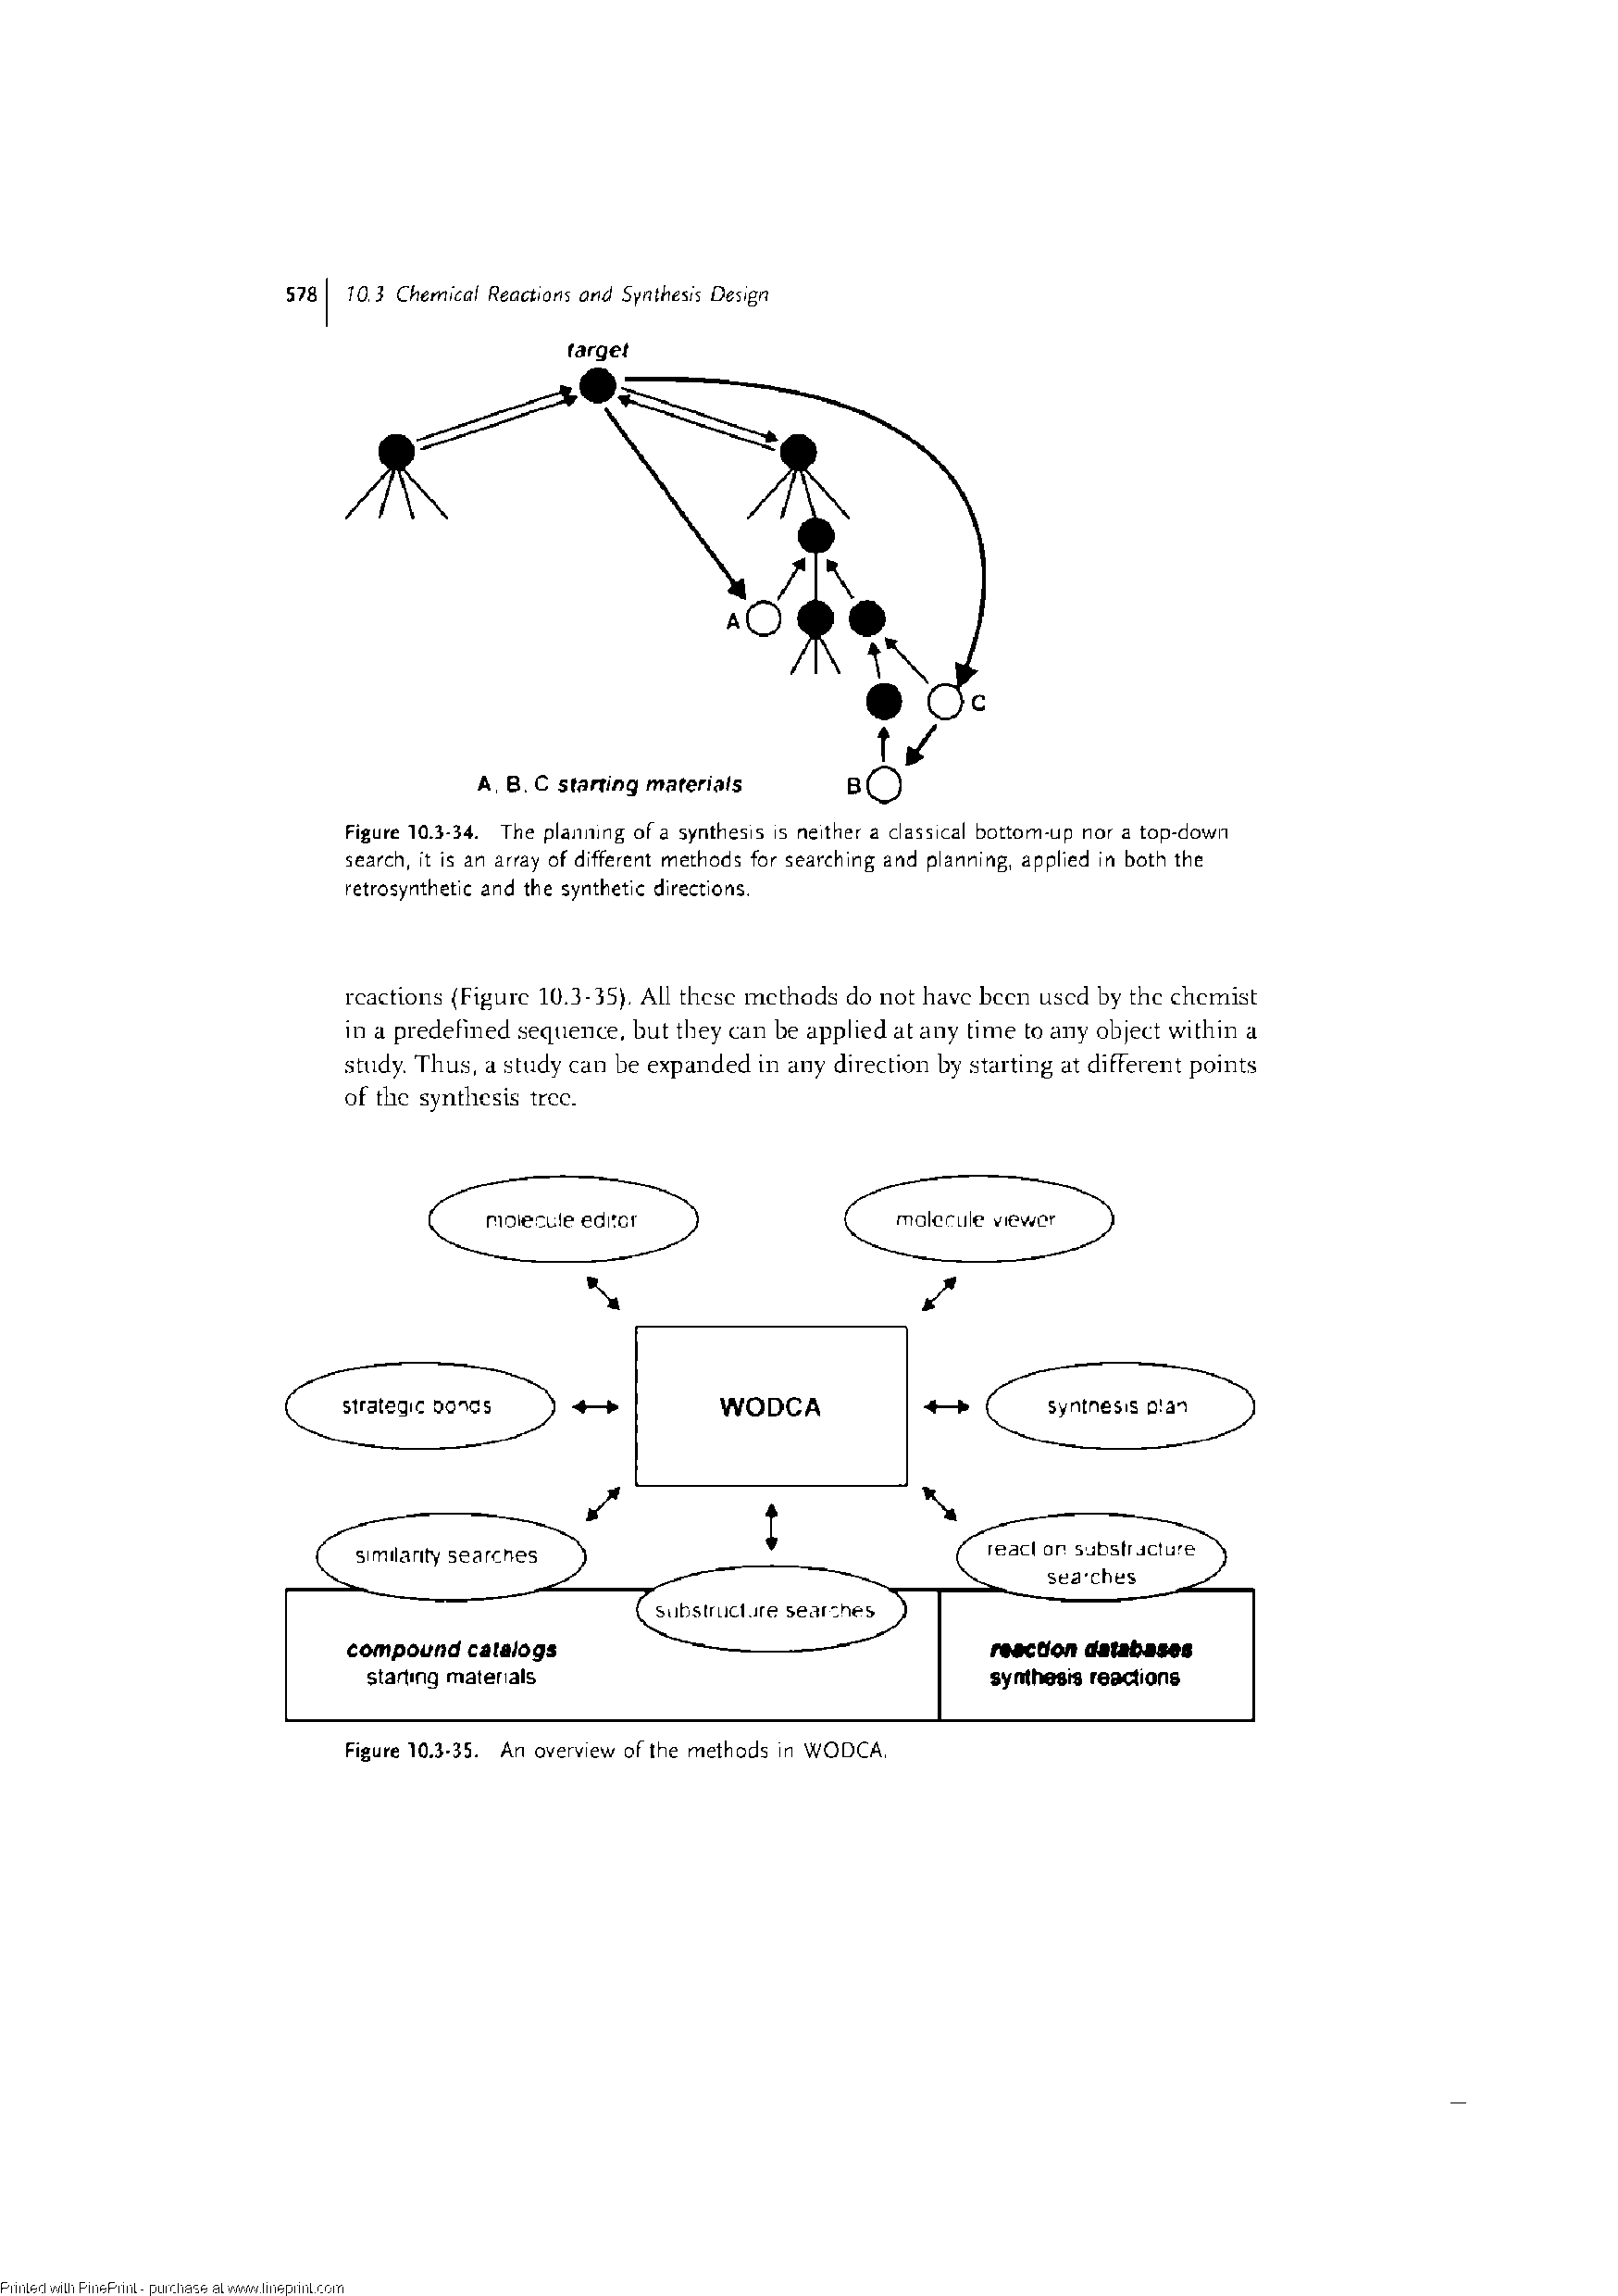 Figure 10.3-34. The plajiiiing of a synthesis is neither a classical bottom-up nor a top-down search, ft is an array of different methods for searching and planning, applied In both the retrosynthetic and the synthetic directions.